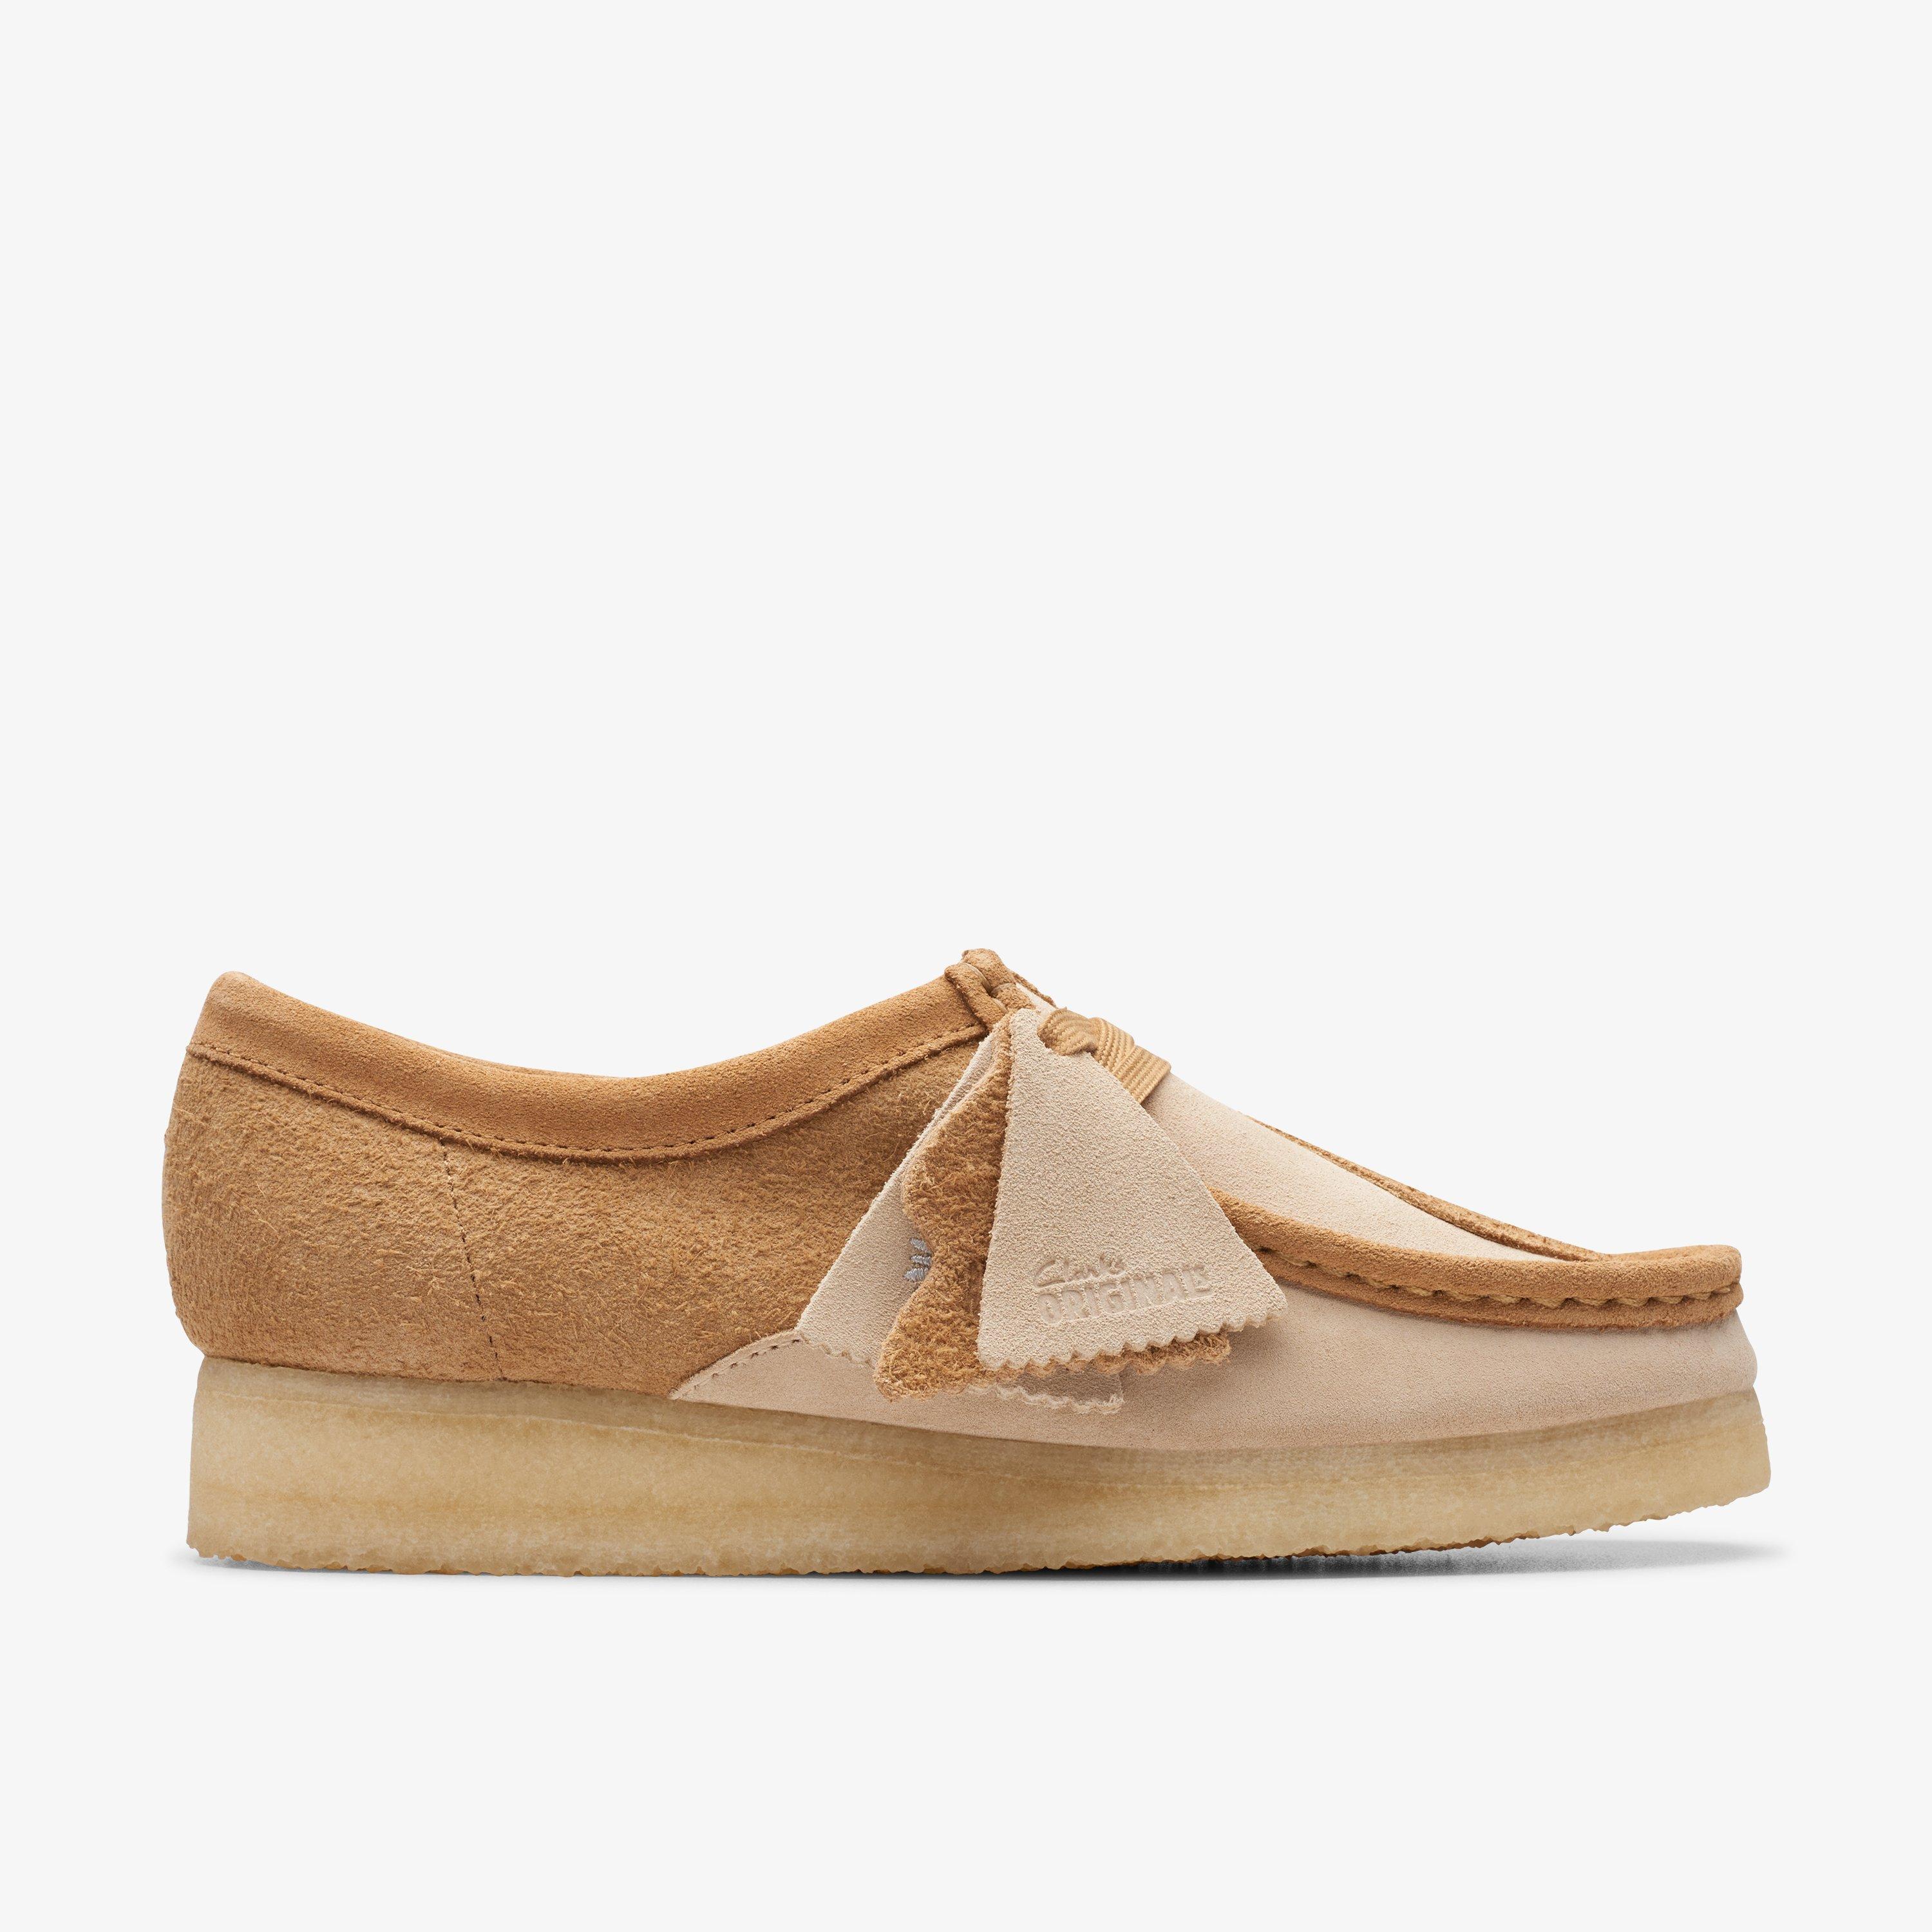 Clarks Wallabee In Brown